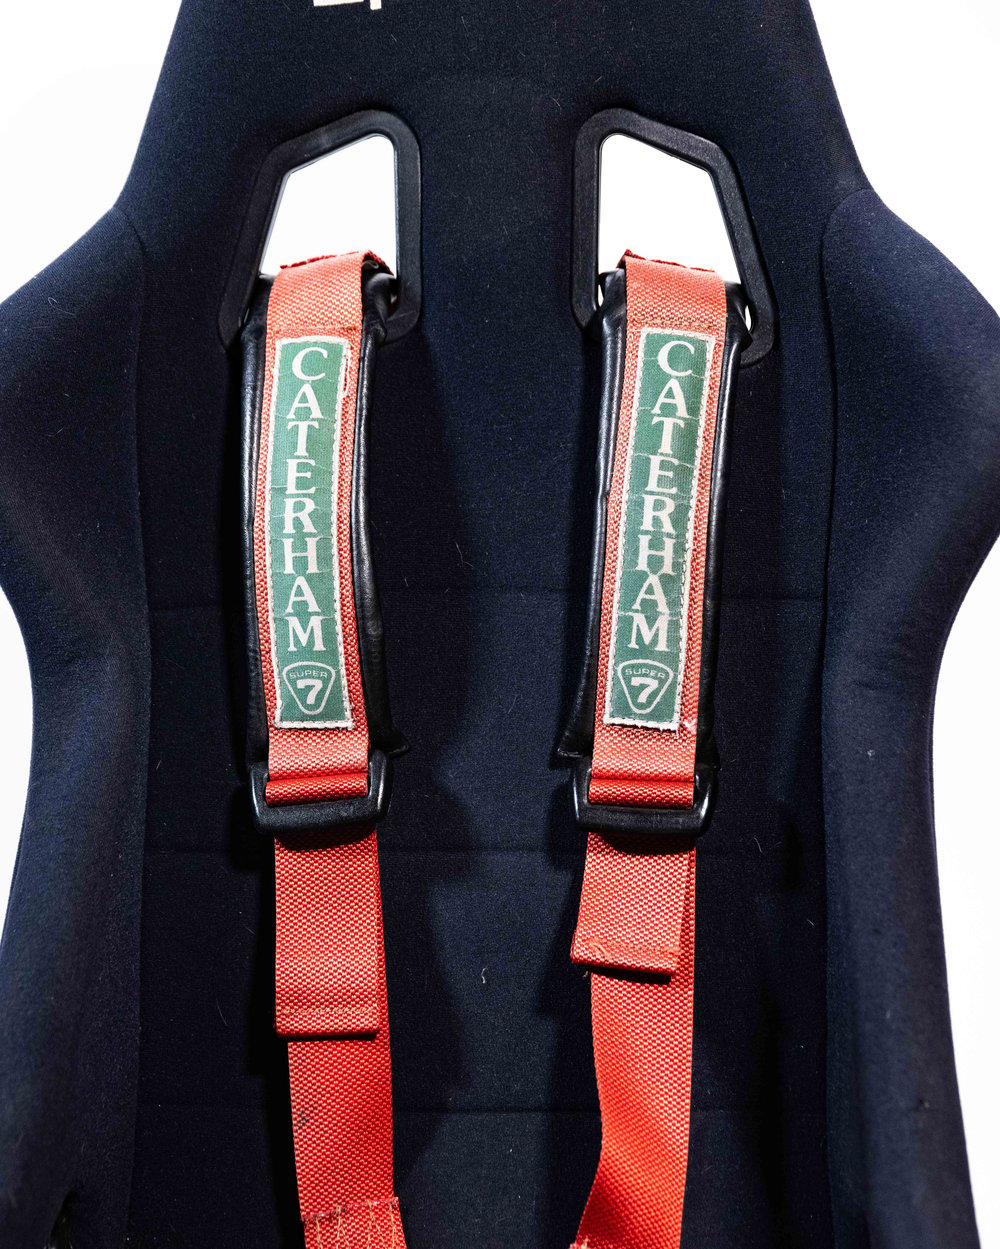 Caterham Red 4-Point Racing Harness